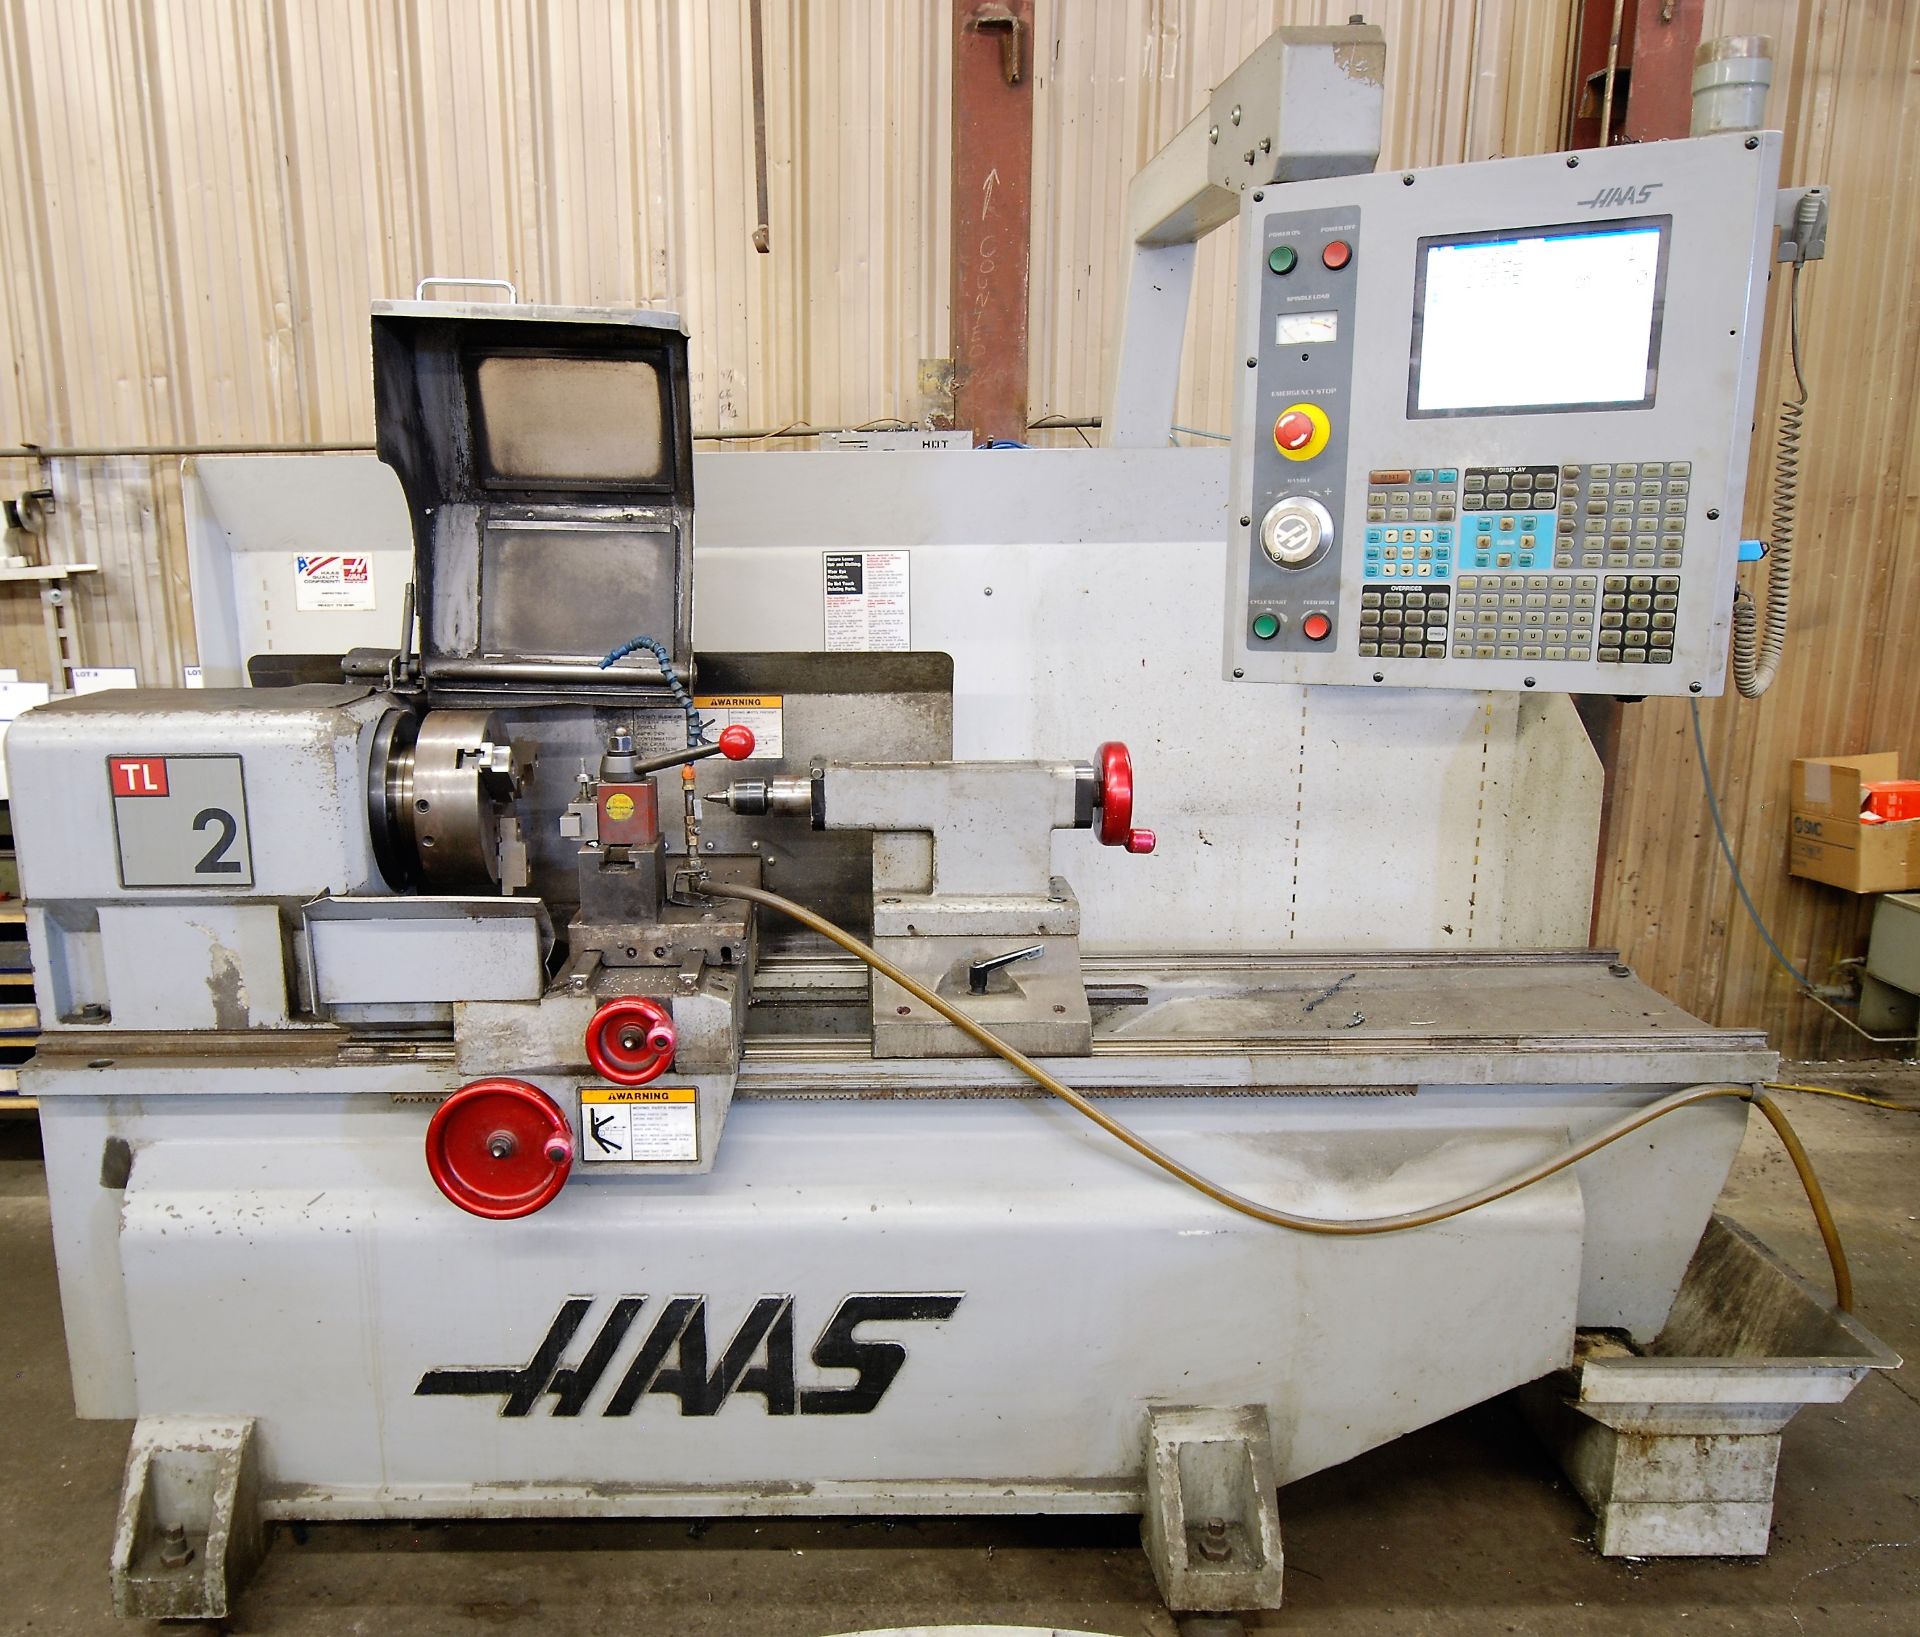 2006 HAAS TL-2 CNC LATHE, S/N 73790, 3” BORE, 10” 3-JAW CHUCK, TAILSTOCK - Image 2 of 12